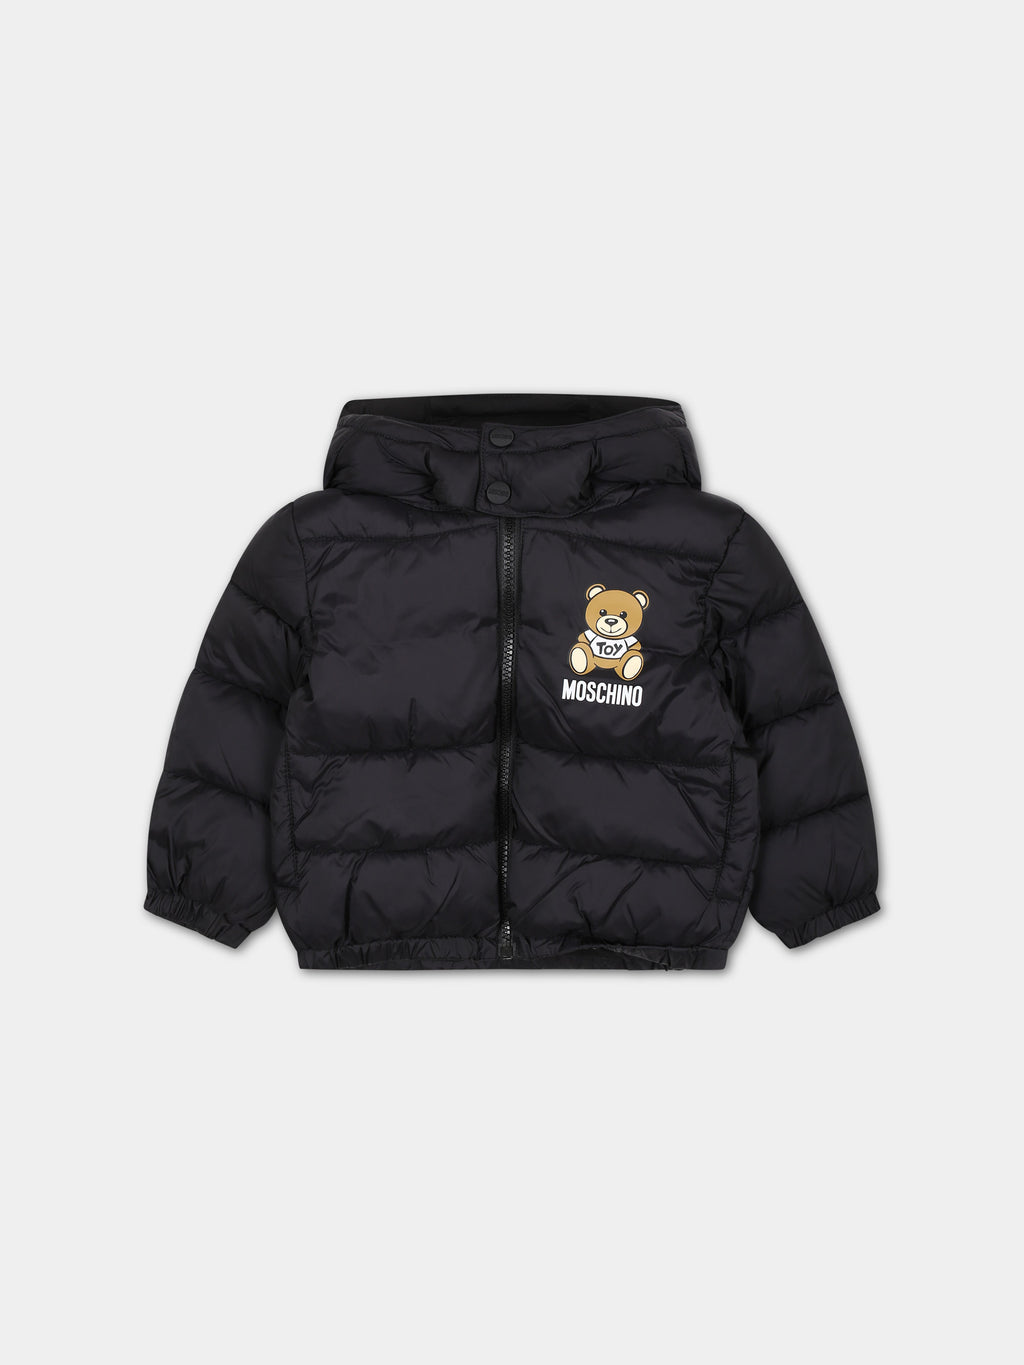 Black down jacket for babies with Teddy Bear and logo